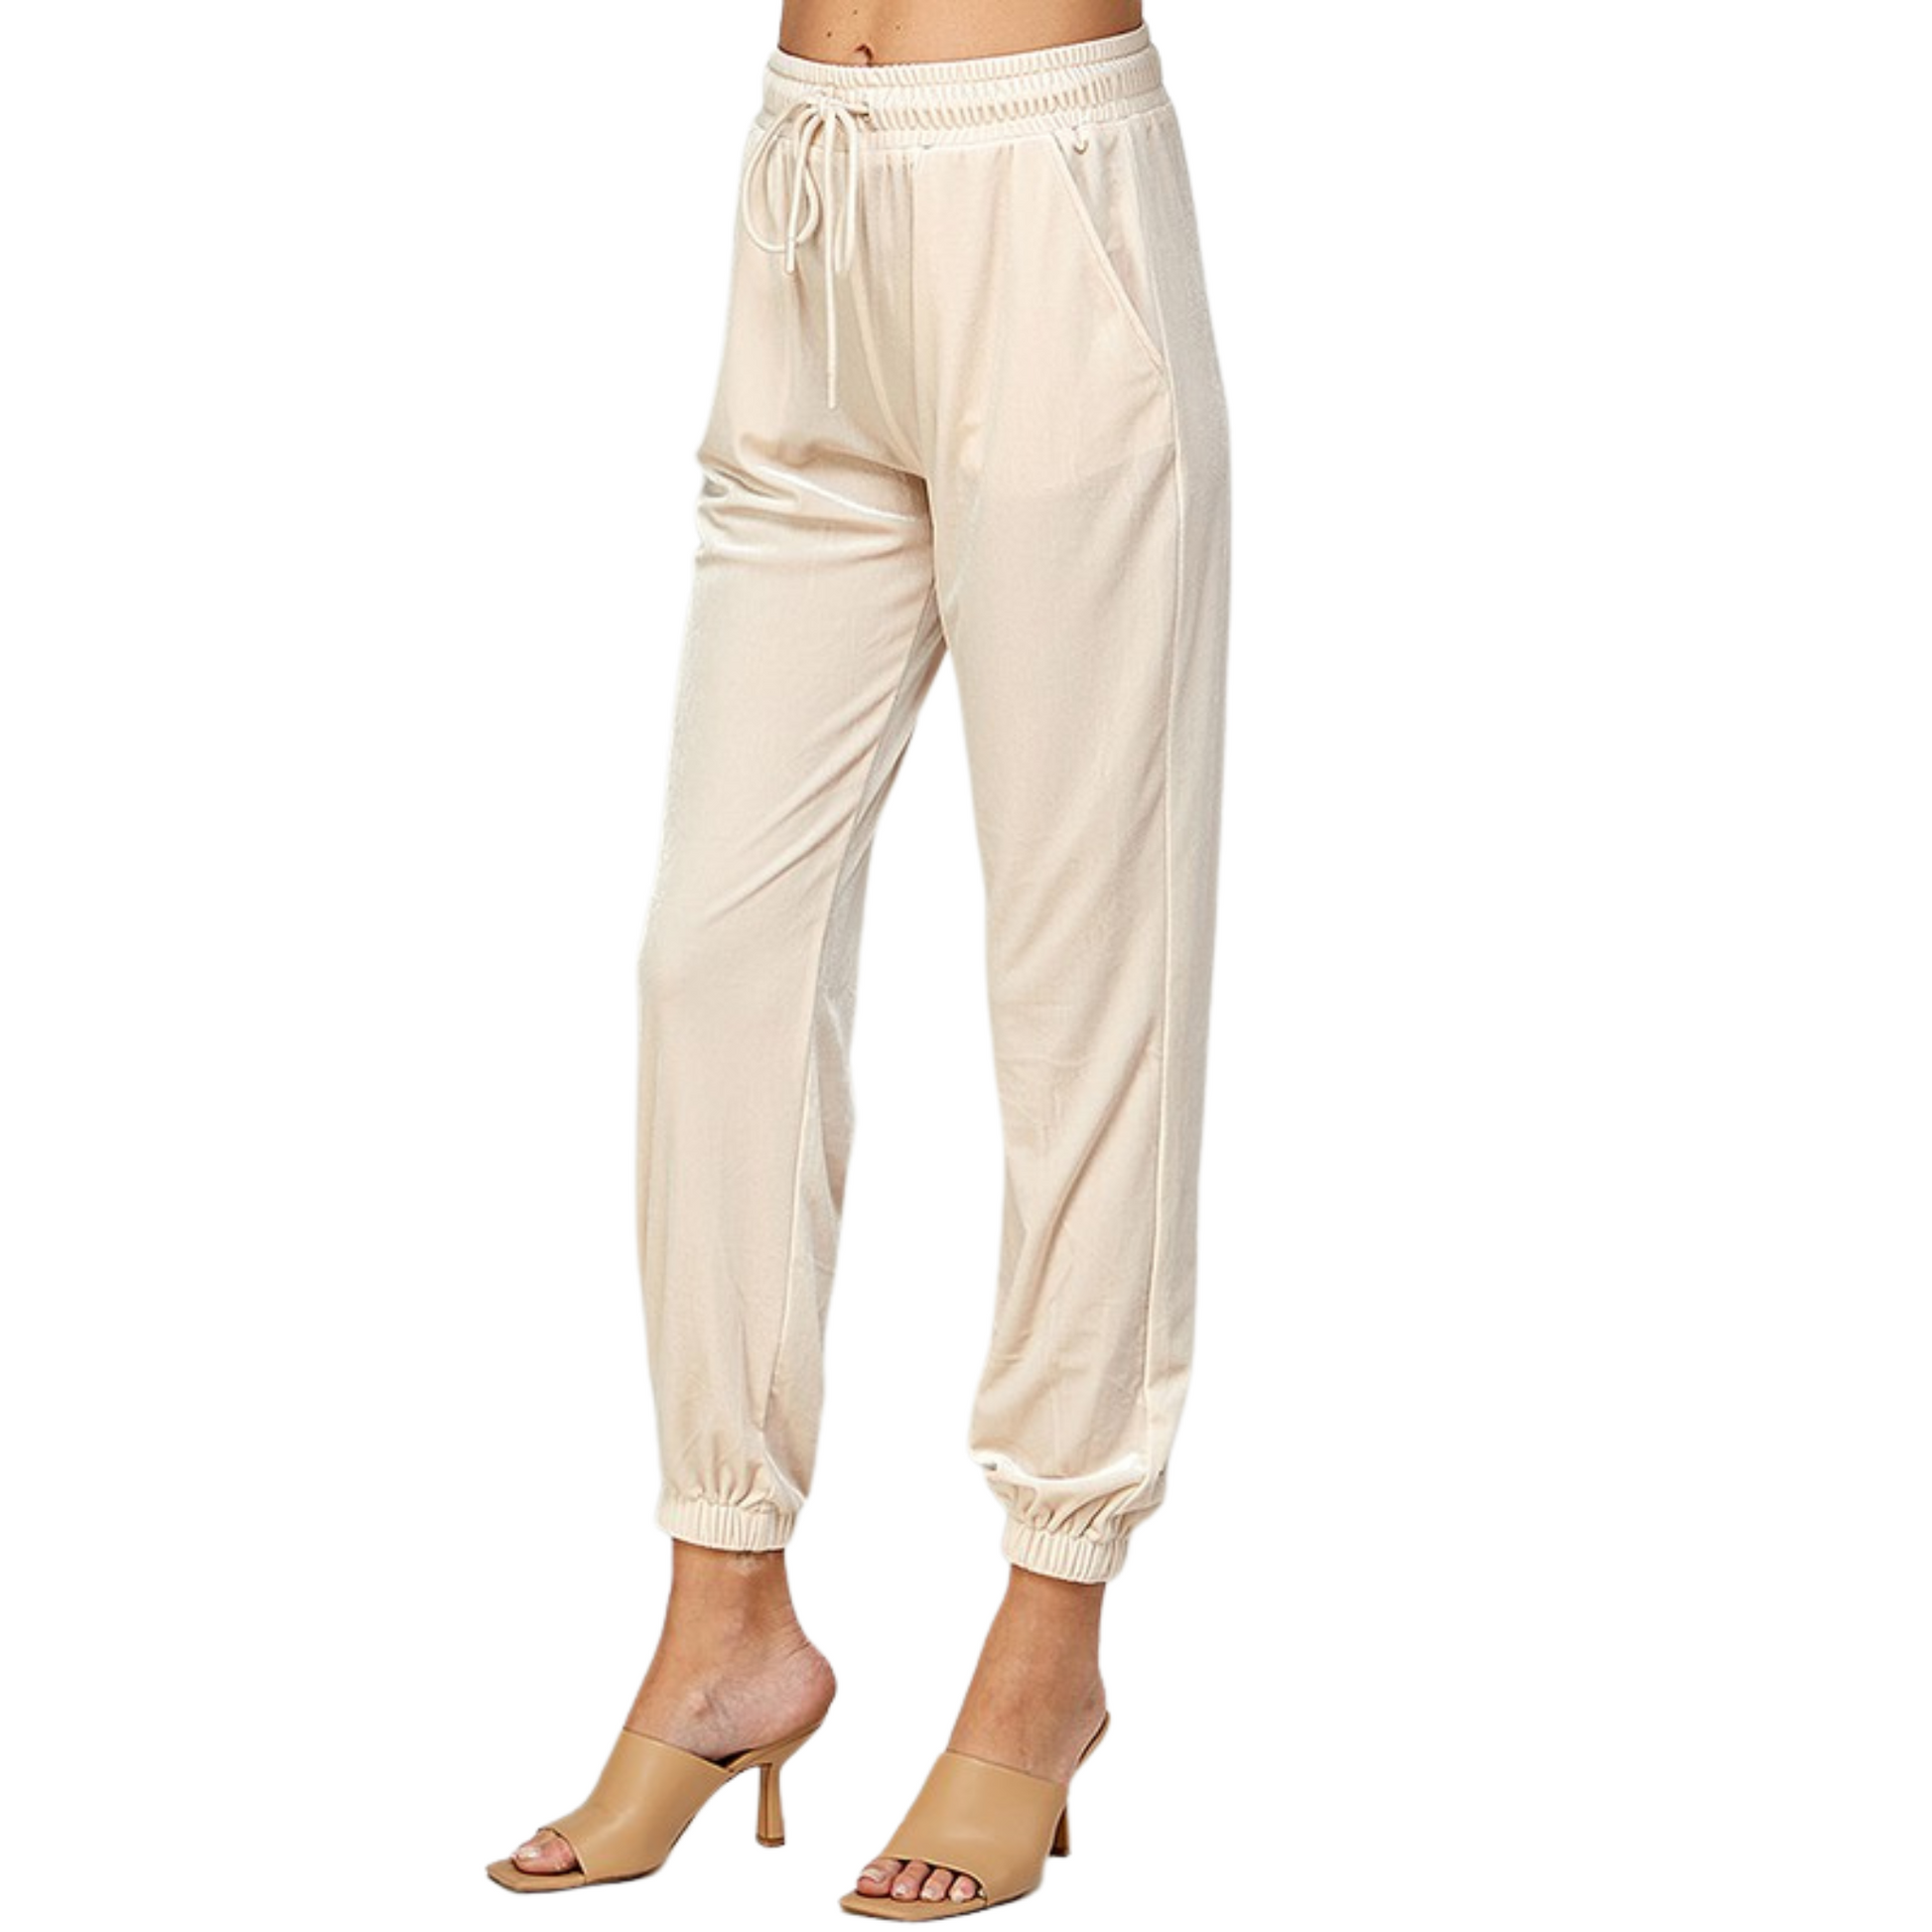 Feel comfortable while making a statement in our Velvet Joggers. These pants feature a cream color and a velvet feel for a truly luxurious look. They are the perfect choice for any occasion.